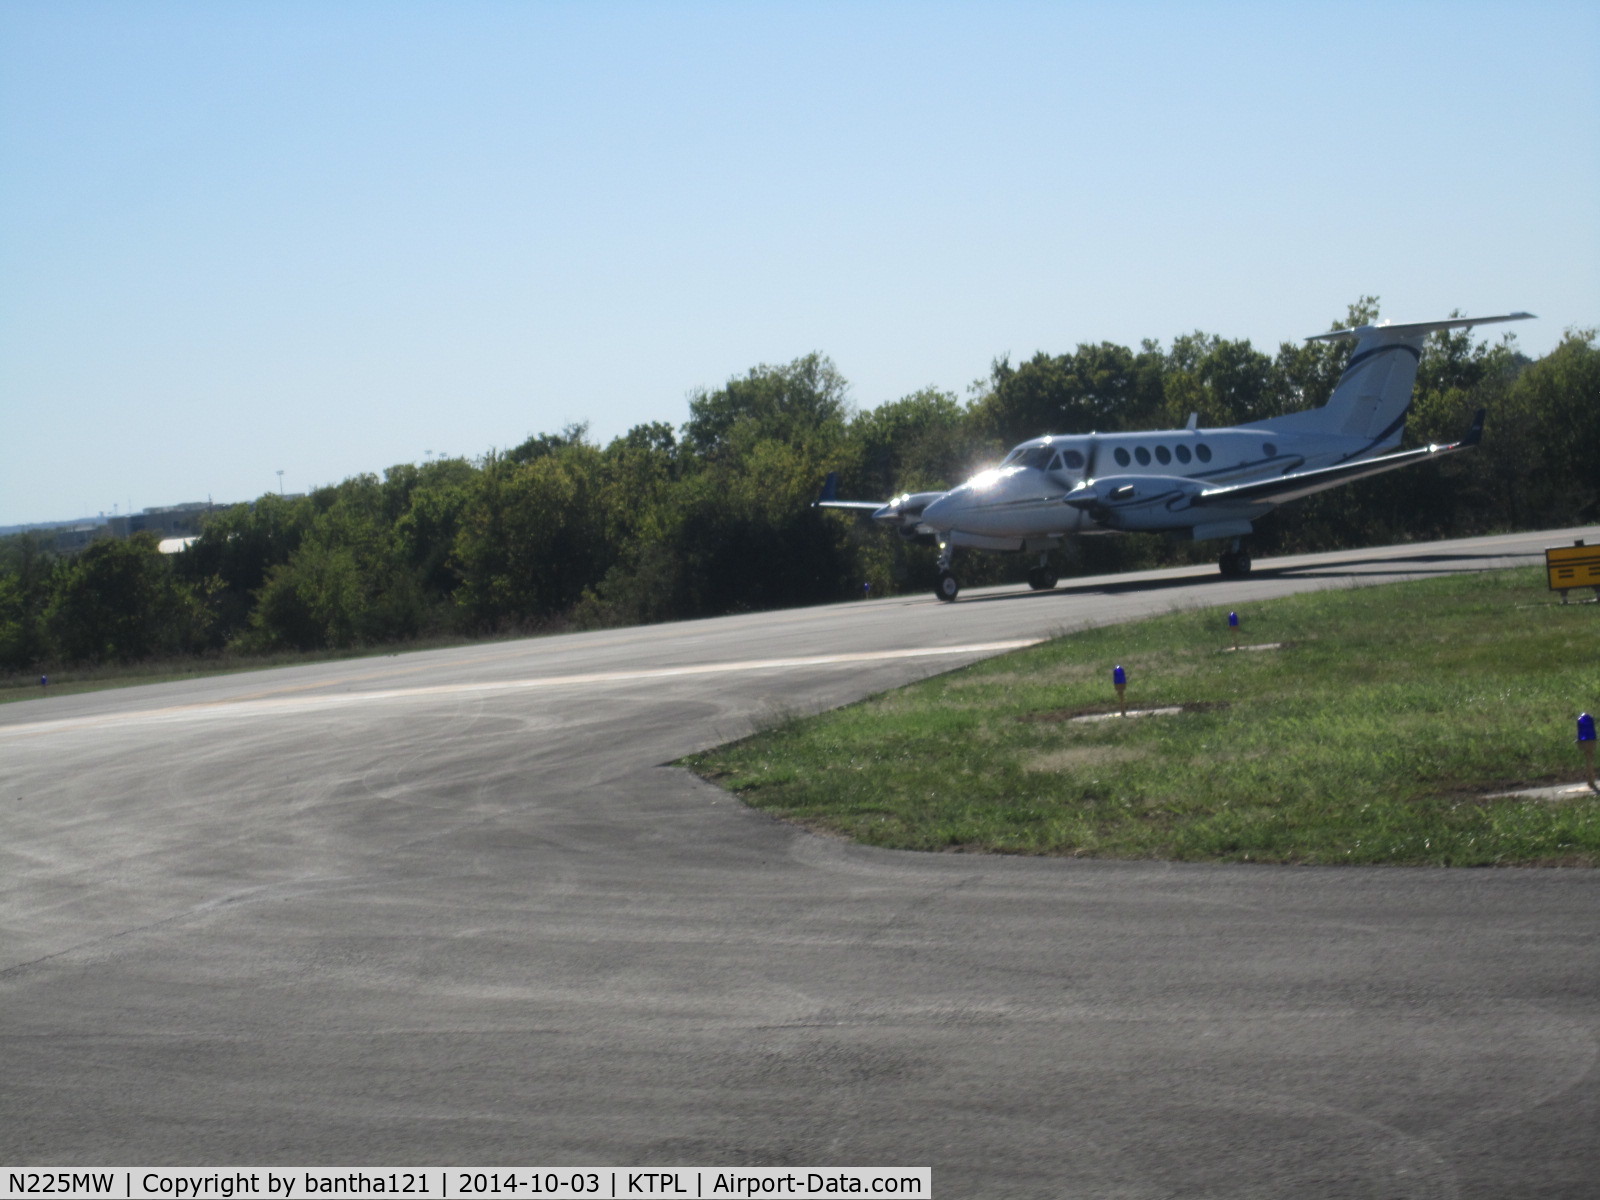 N225MW, 2013 Beechcraft B200GT King Air C/N BY-185, Taken from Cessna 172C while on takeoff roll